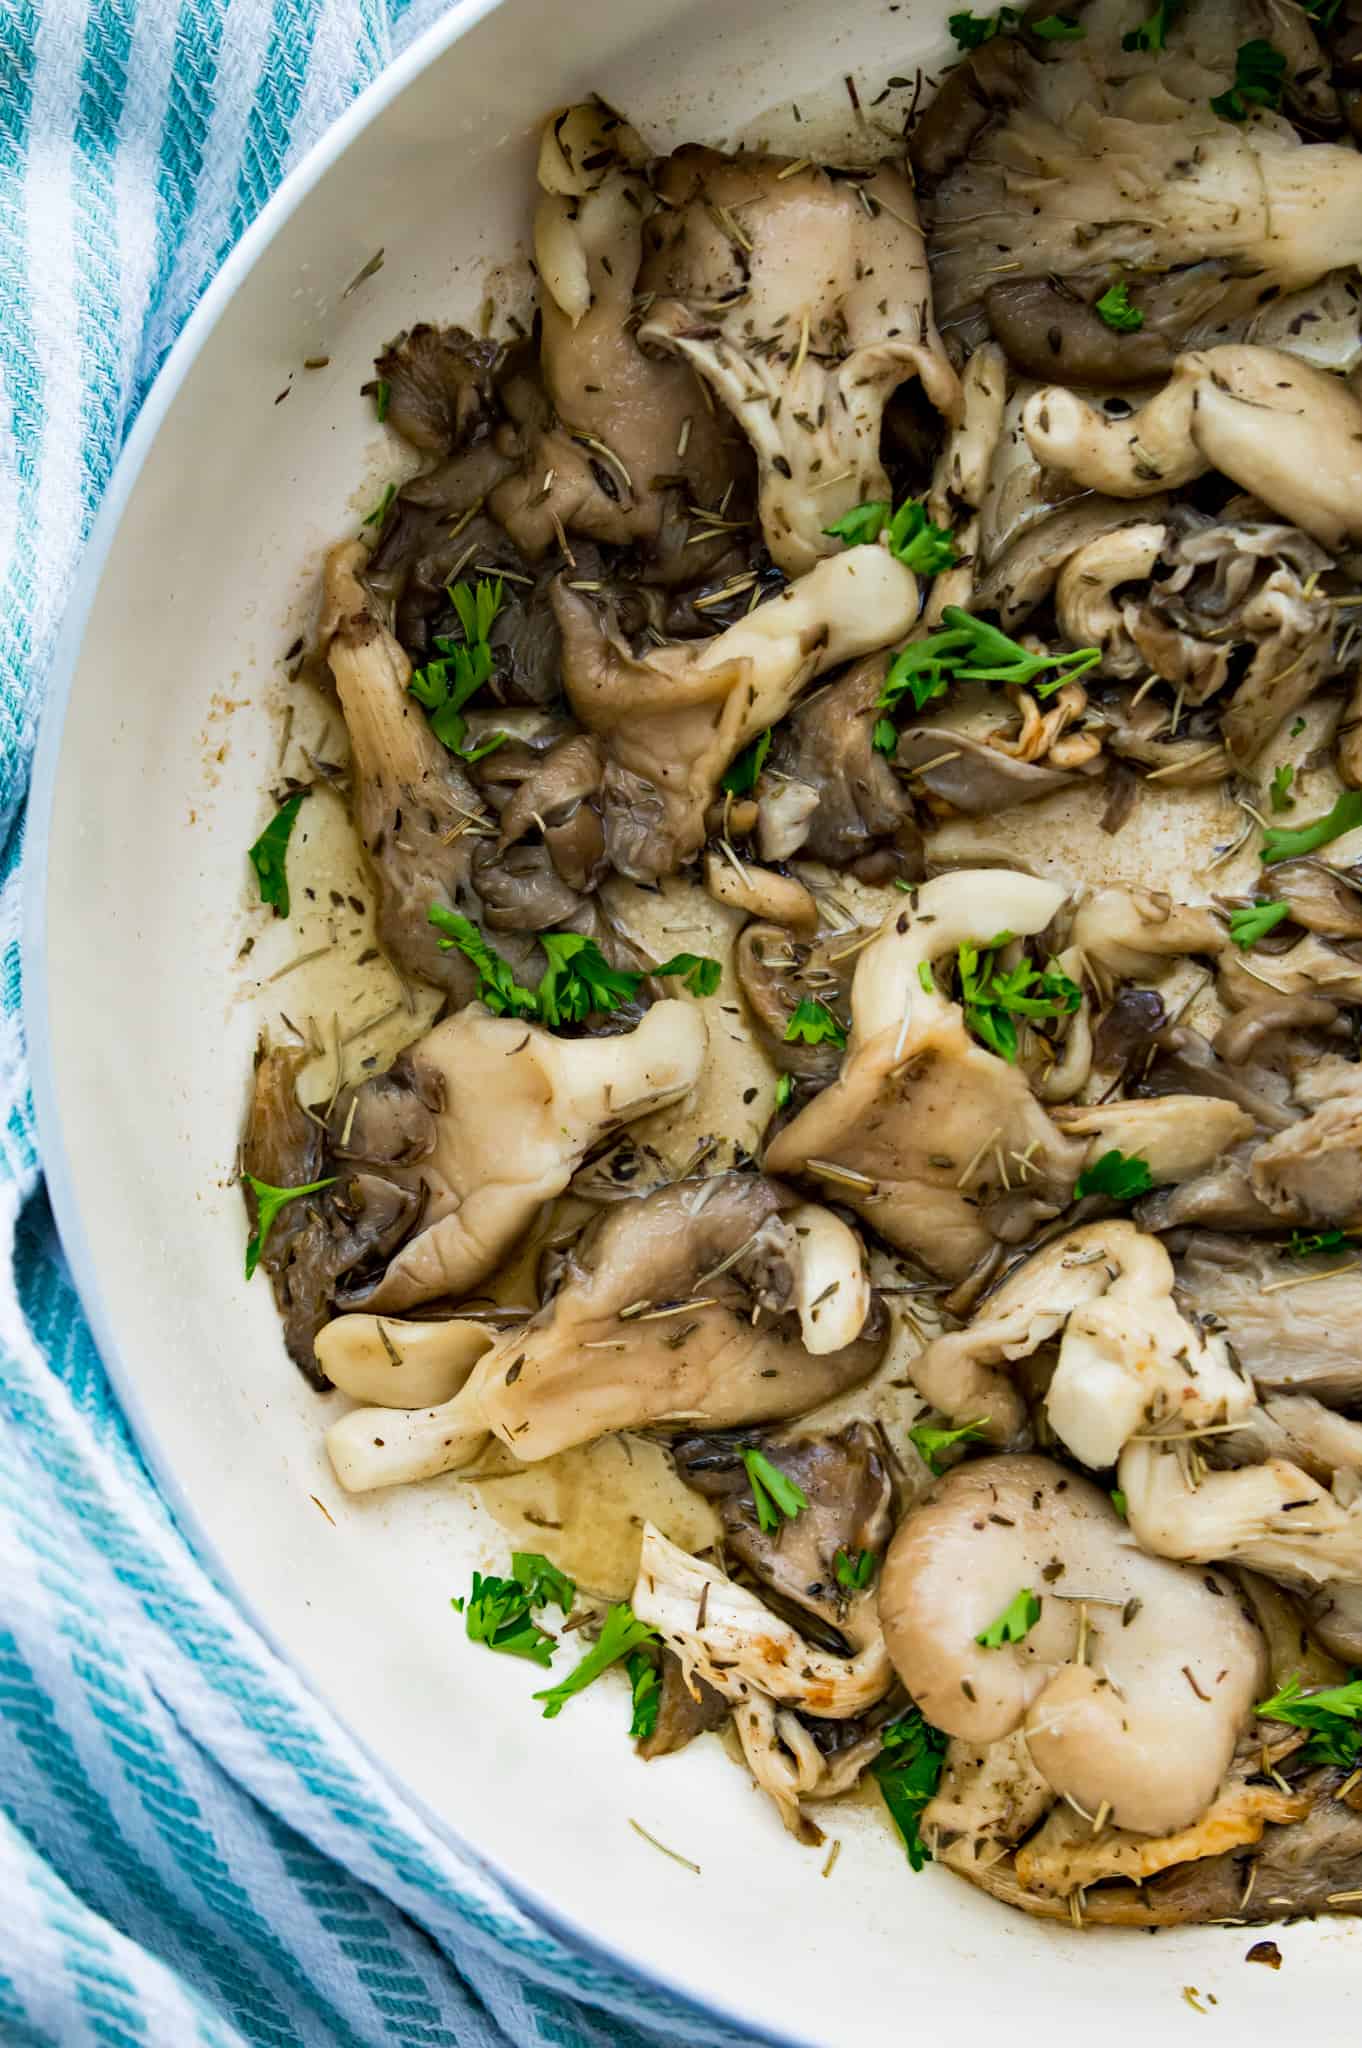 A pan of cooked oyster mushrooms with fresh herbs on top.